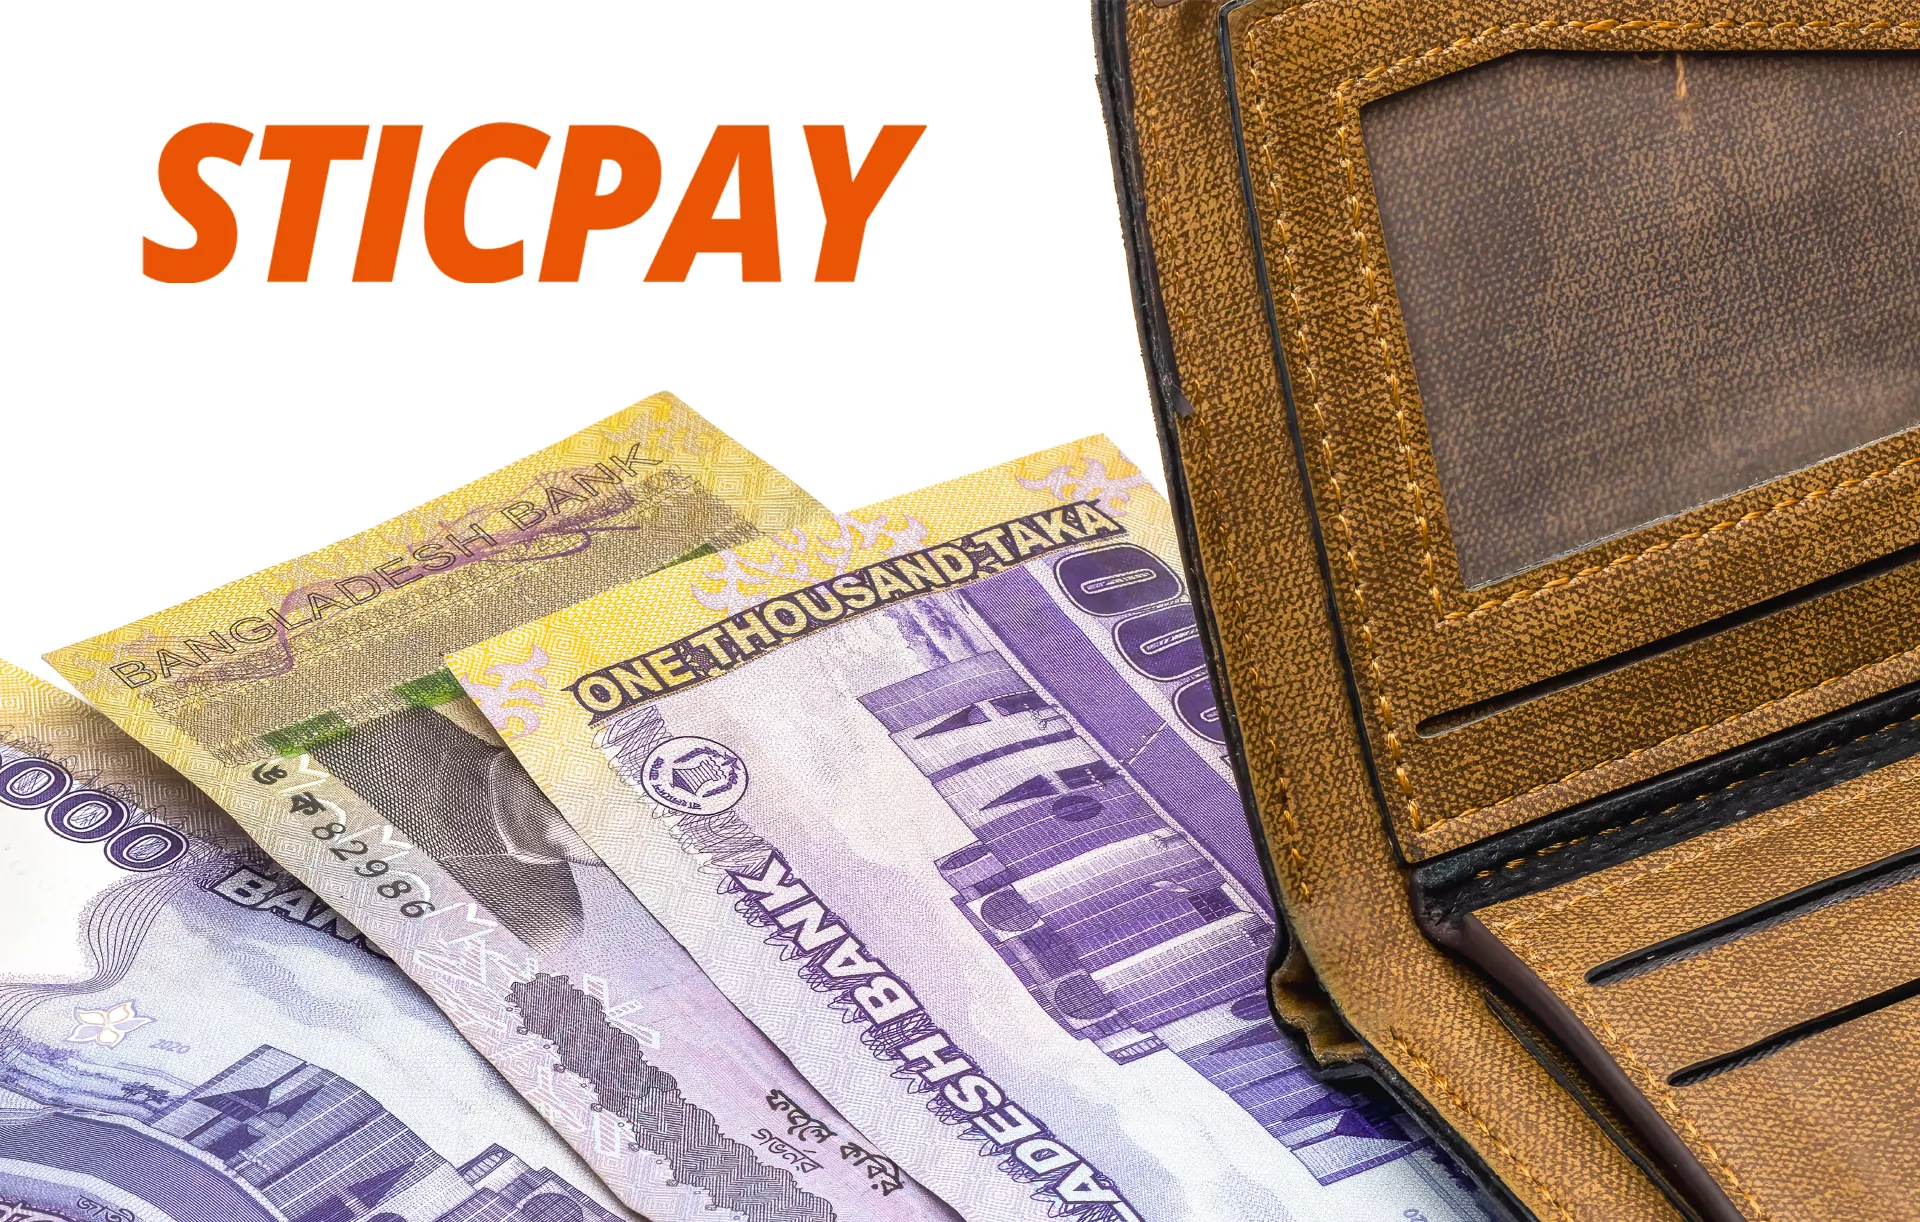 Sticpay is a reliable payment method that is used quite popular among bettors from Bangladesh.